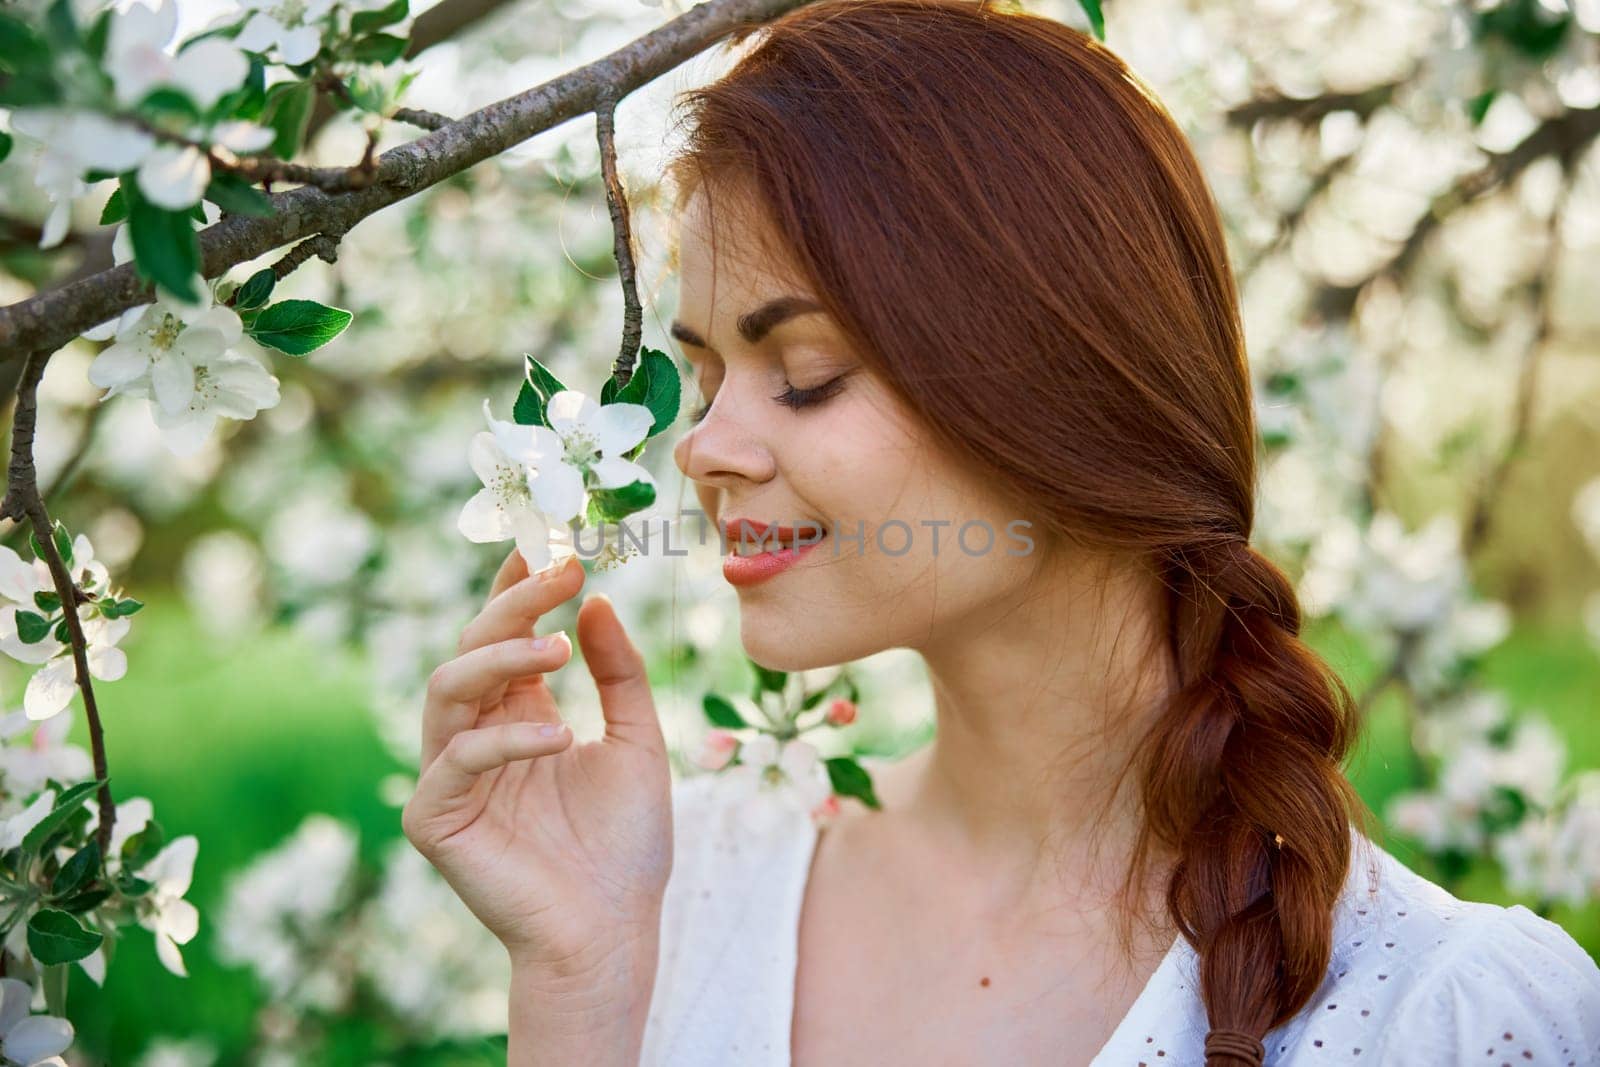 close portrait of a red-haired, laughing woman smelling flowers from a tree by Vichizh